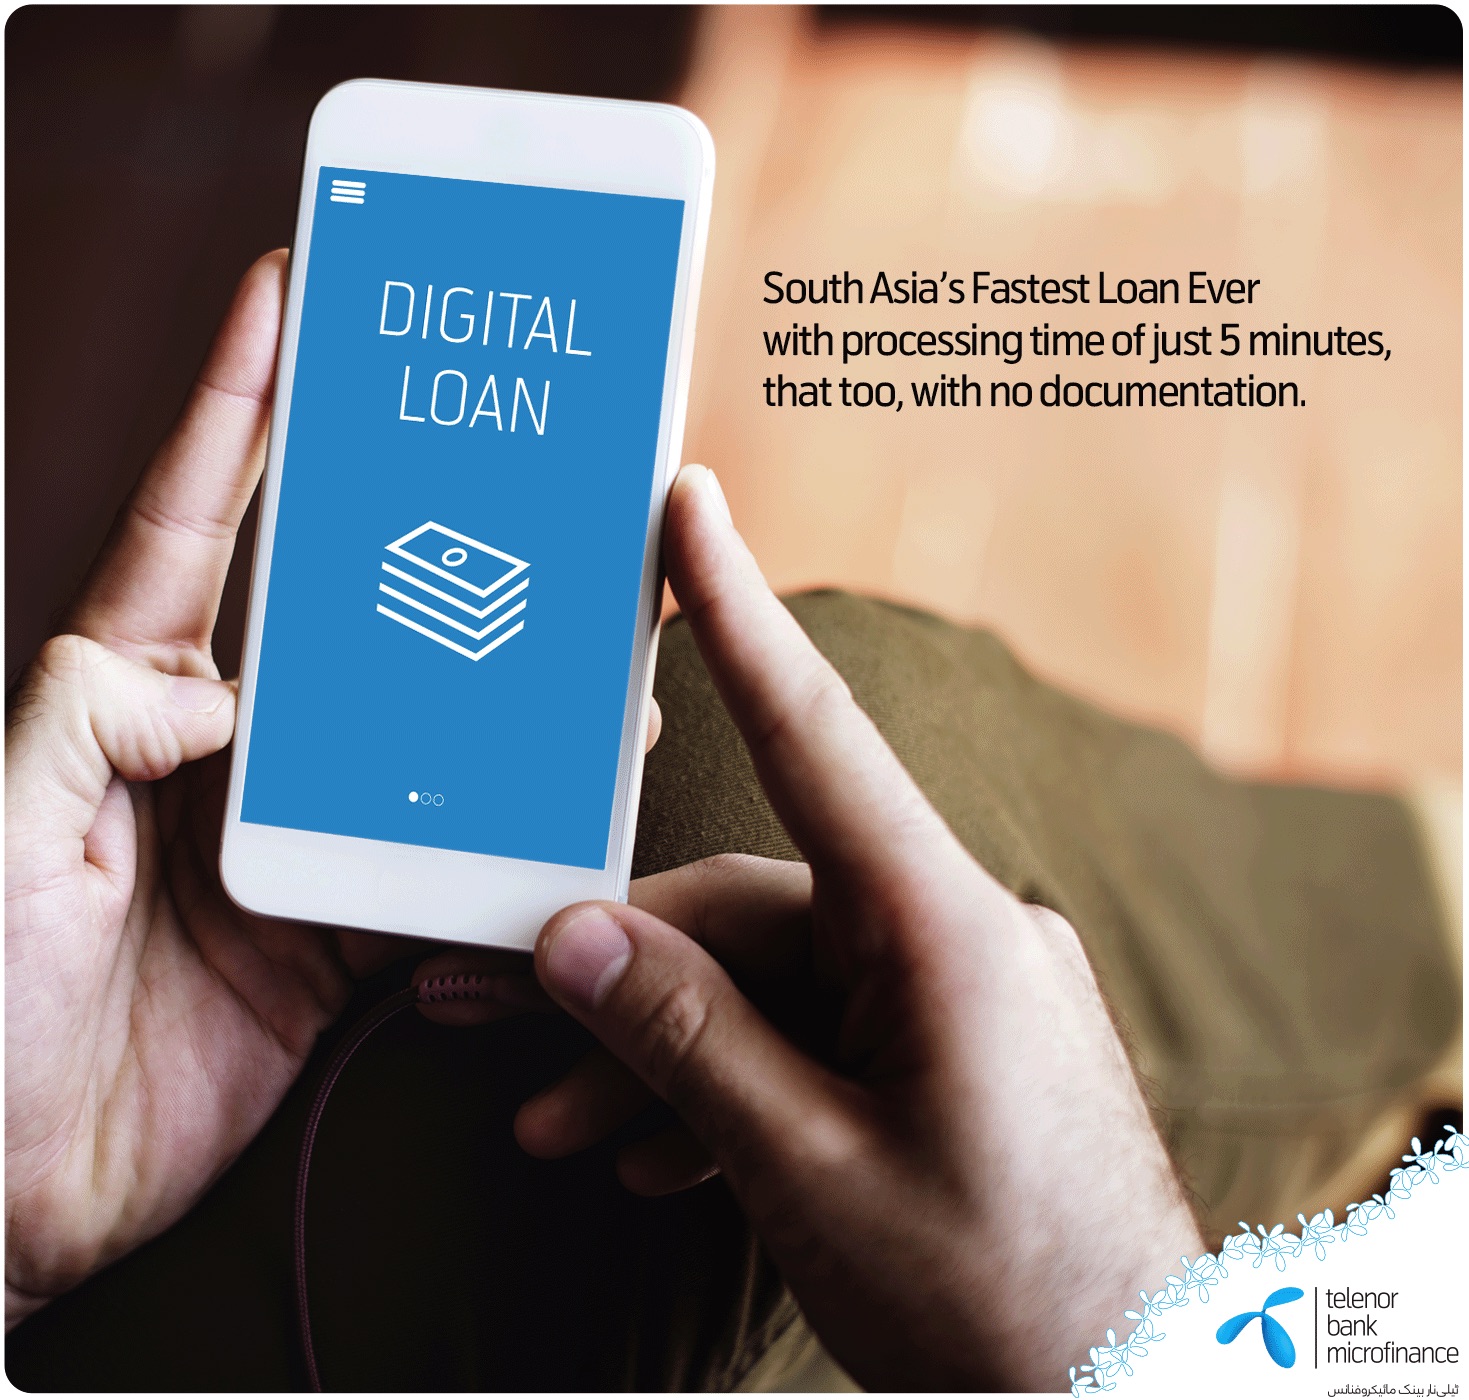 Digital Lending game in Pakistan is about to heat up - Clarity.pk